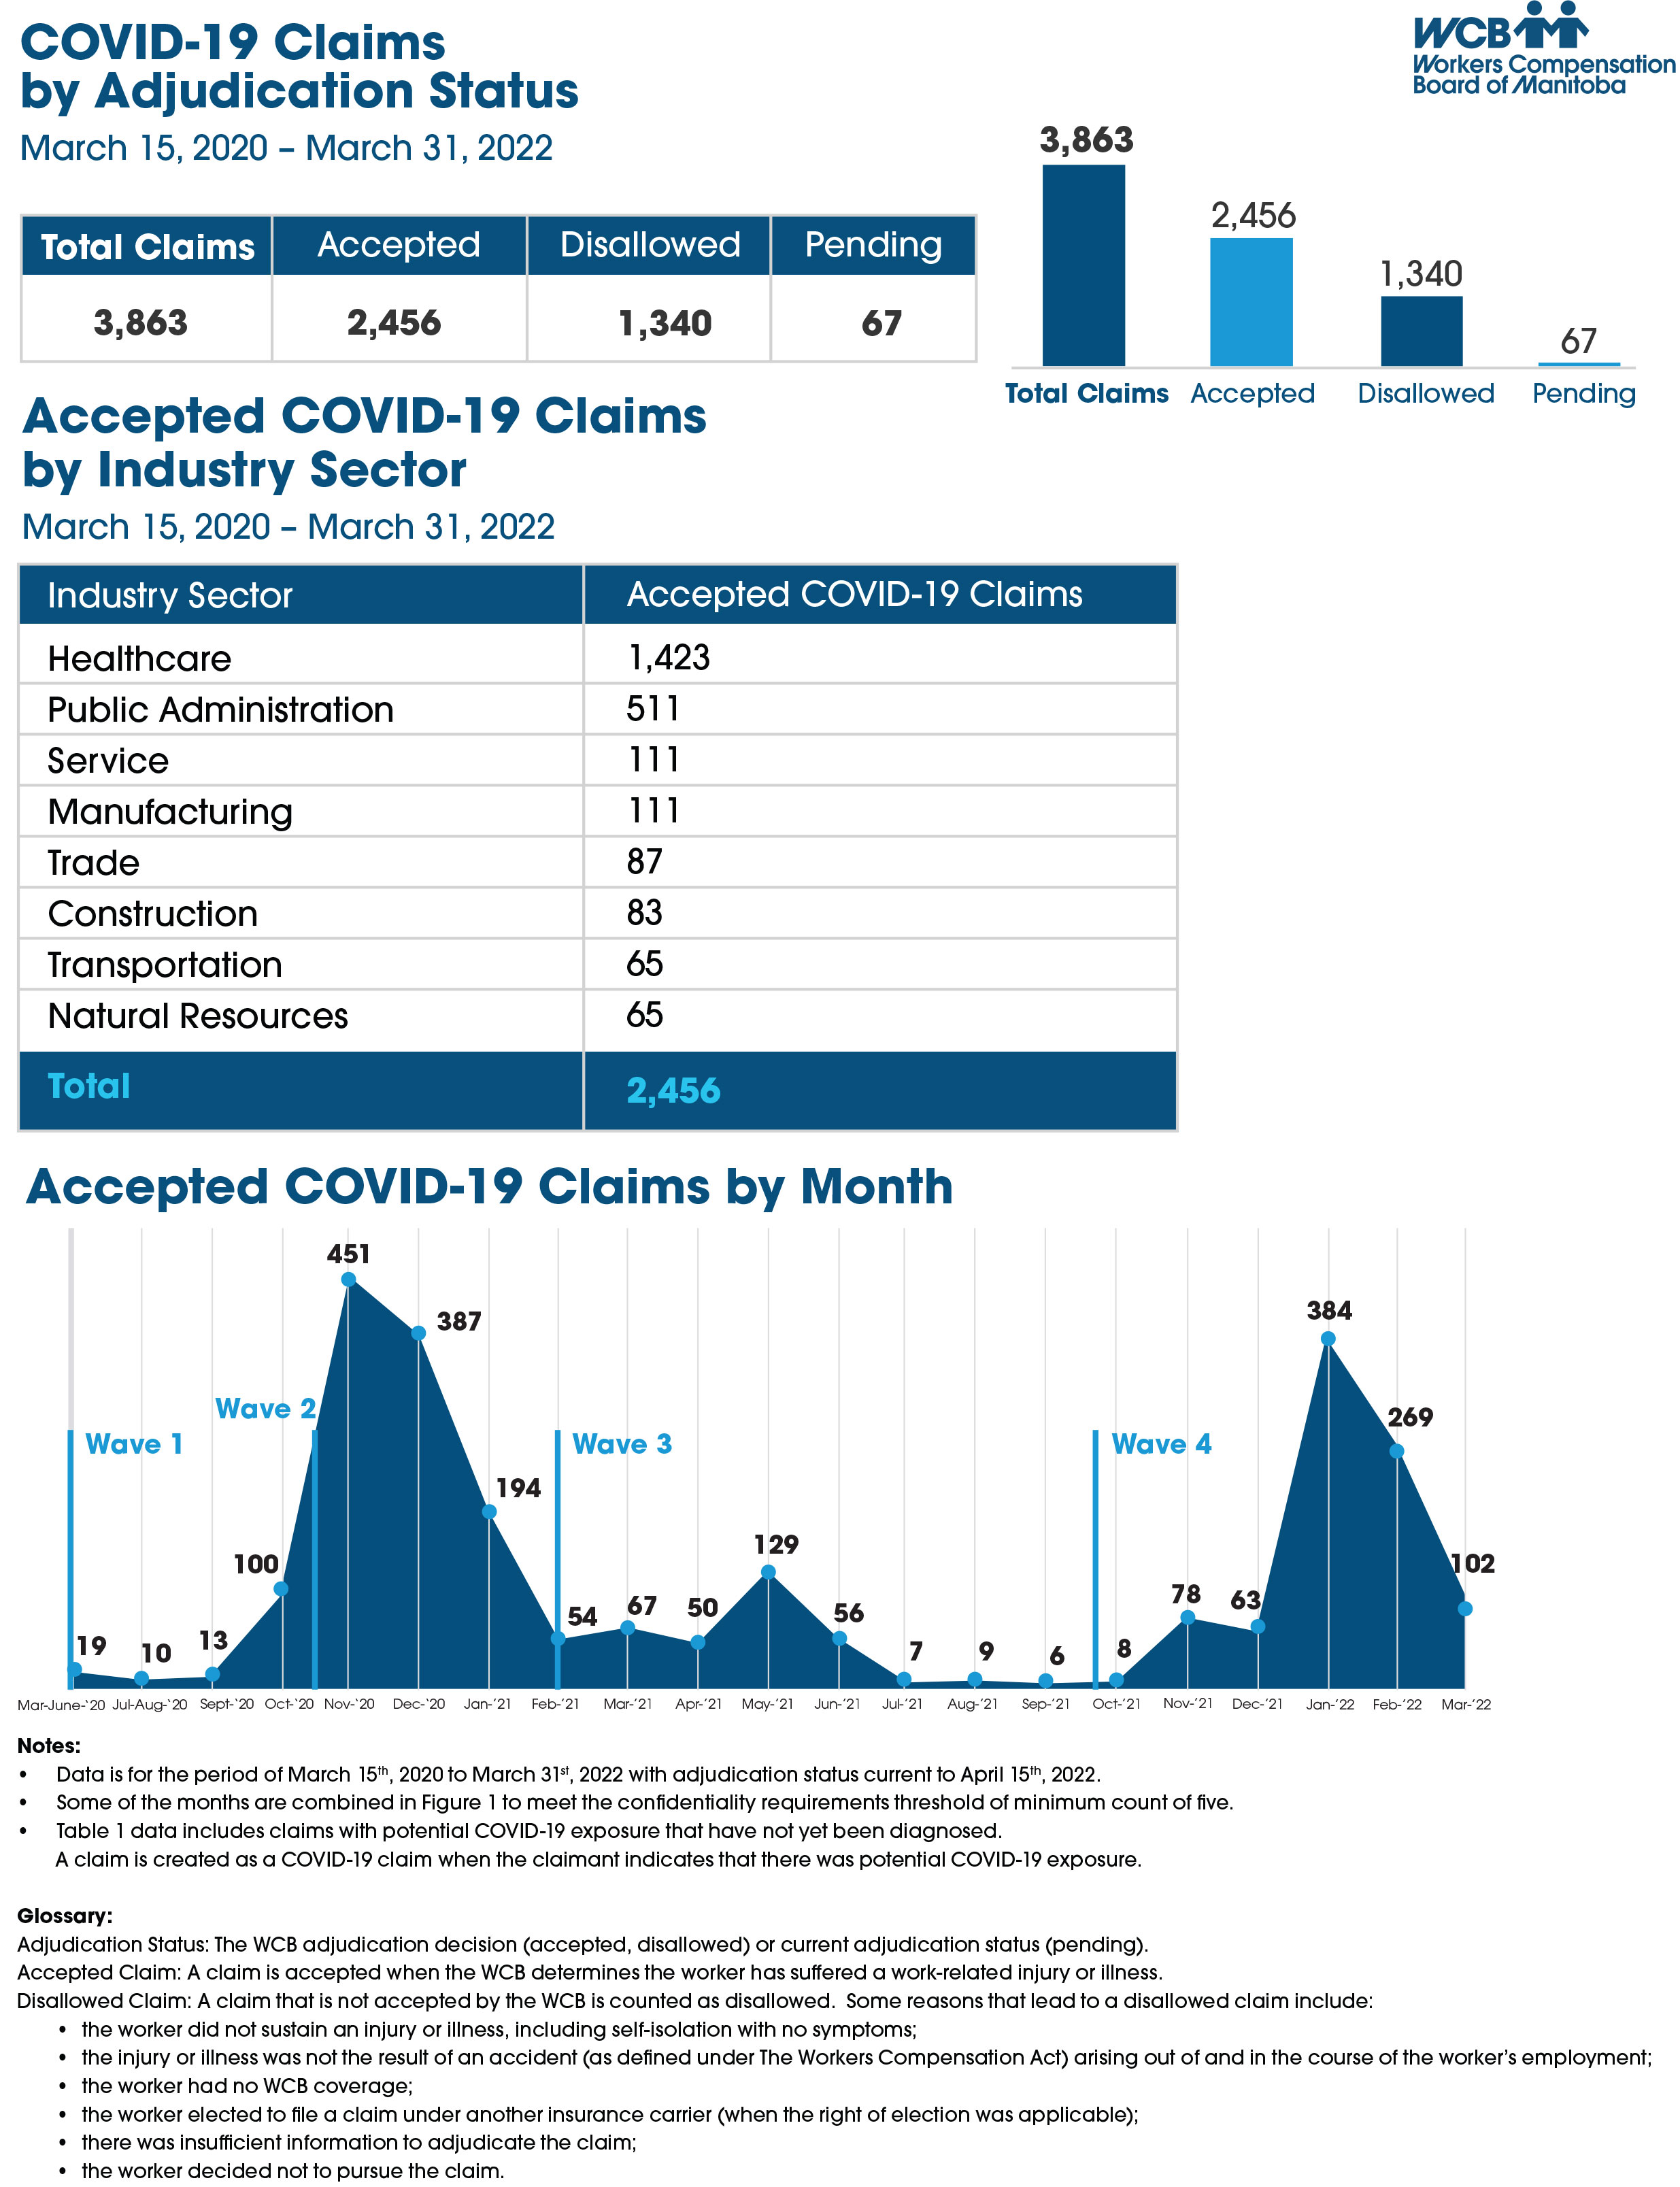 COVID-19 claims by industry, month, and adjudication status